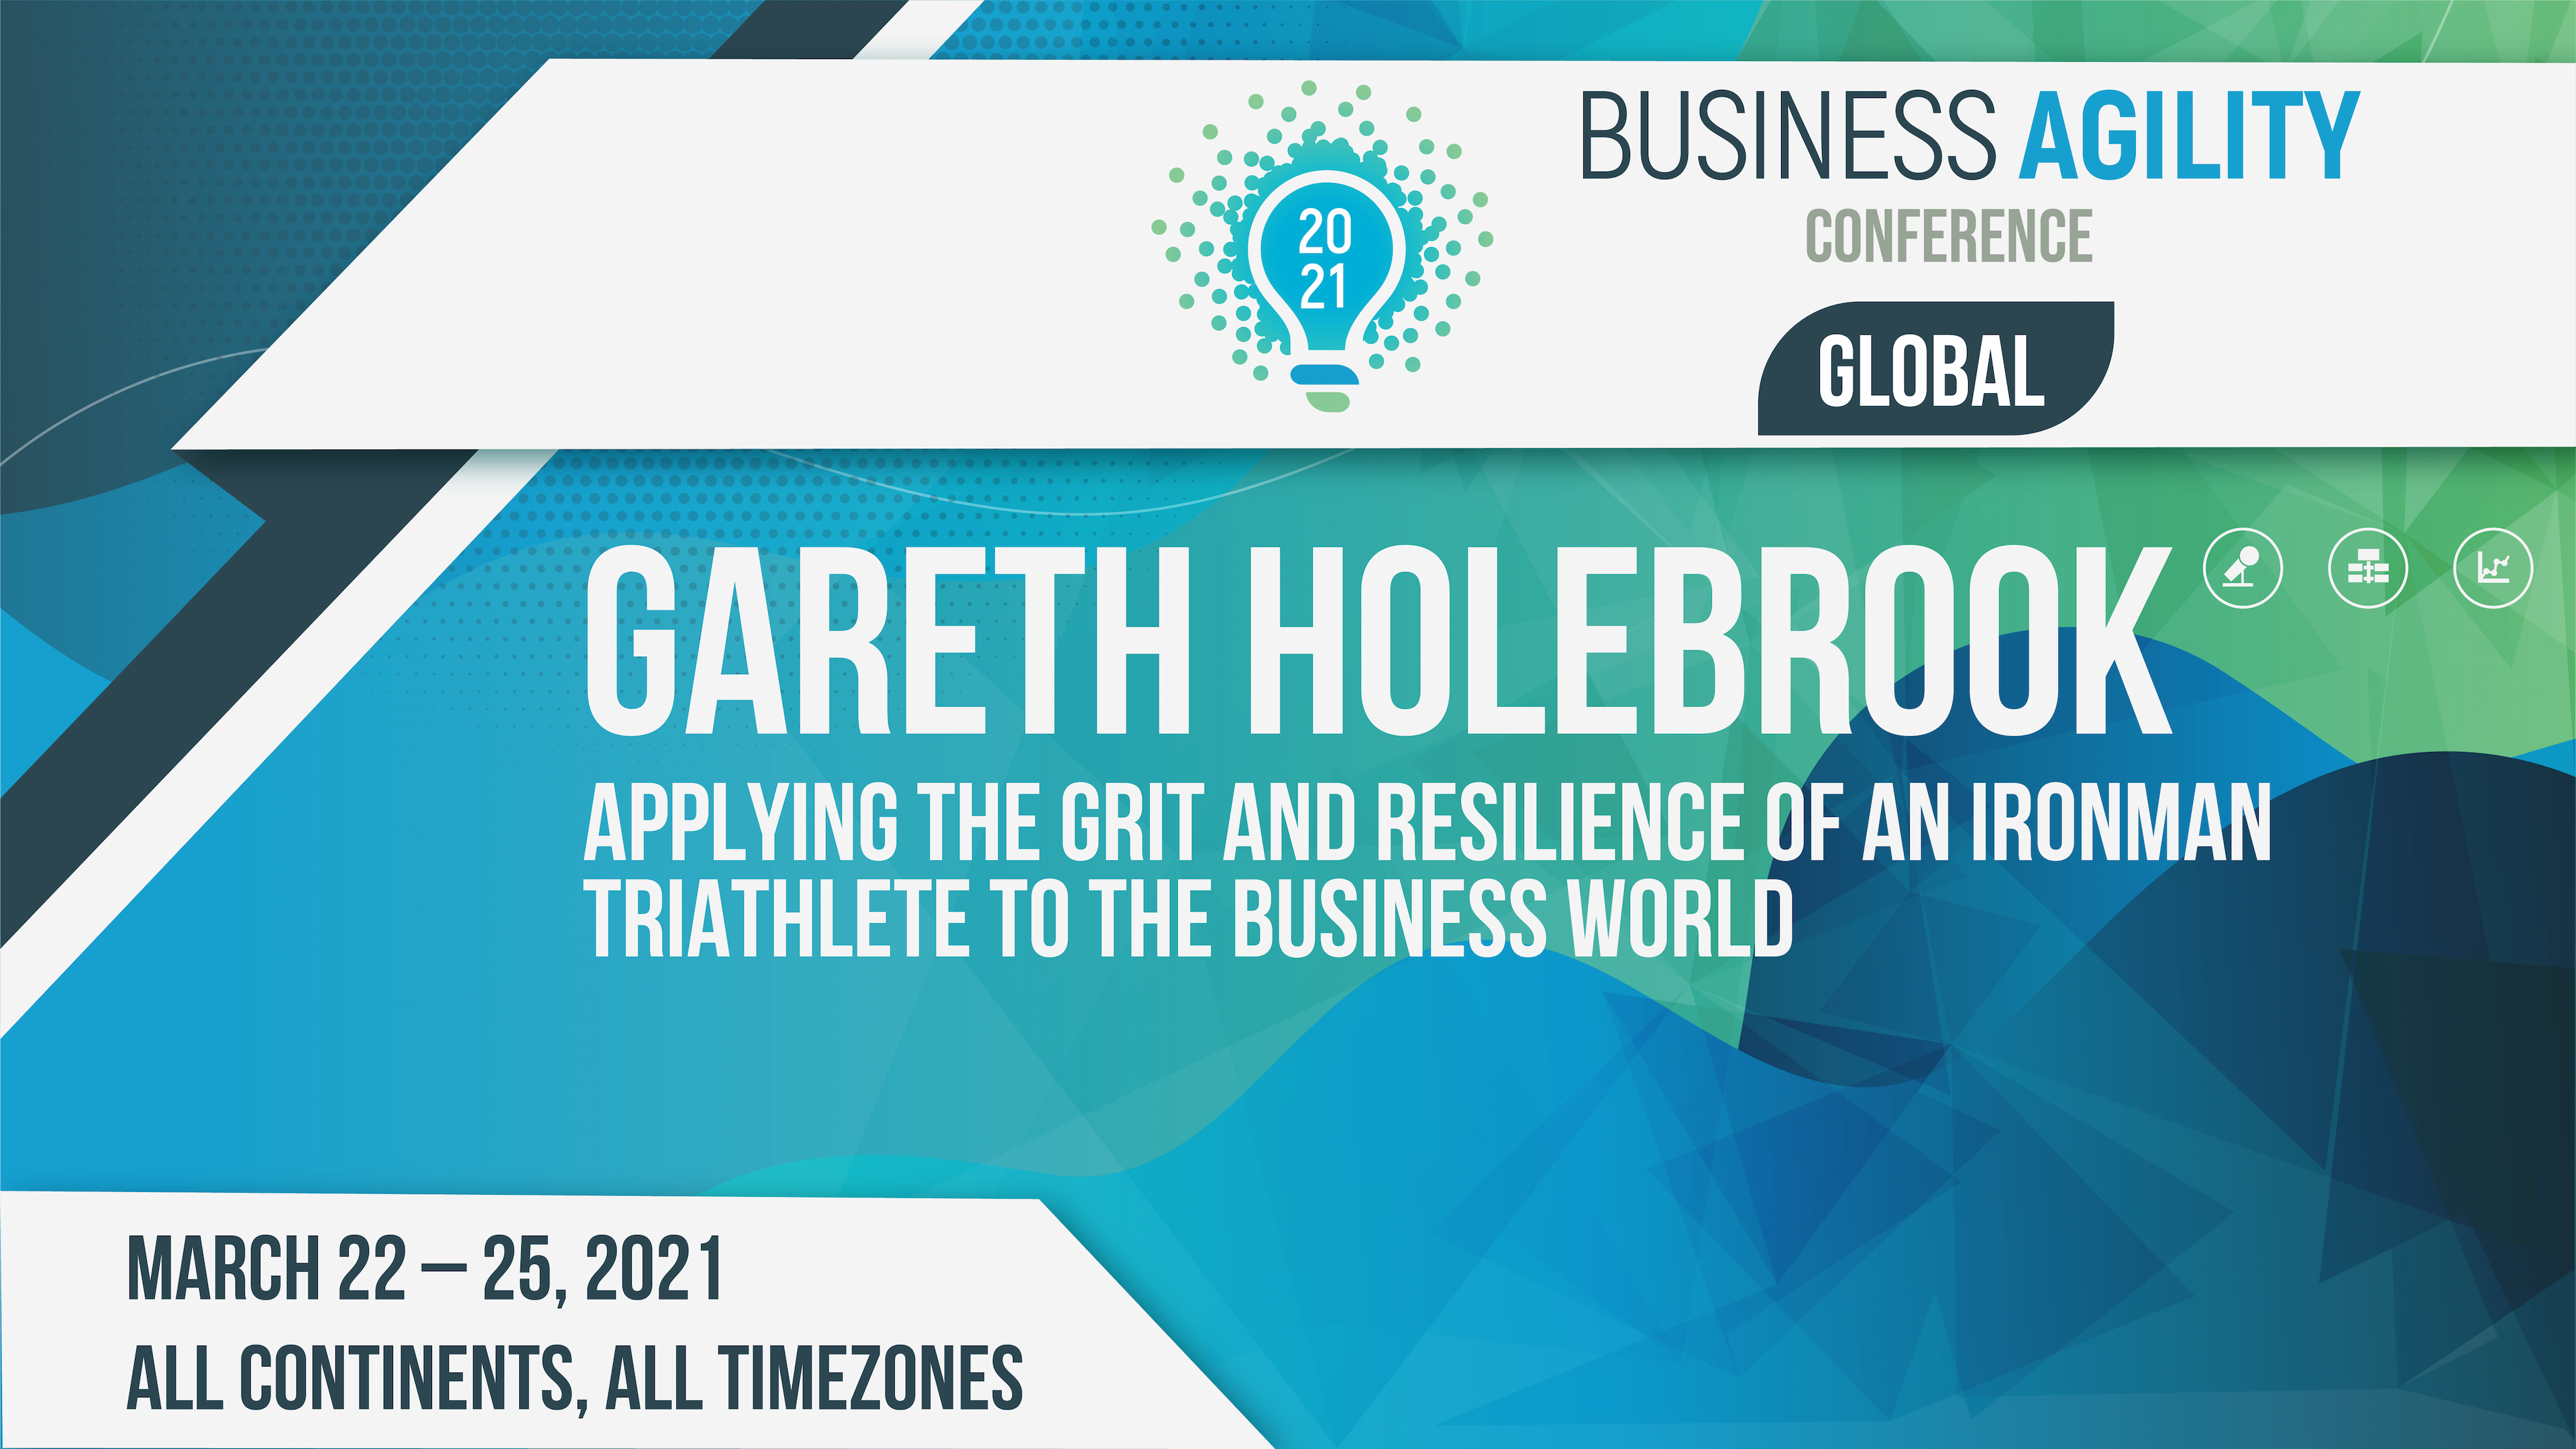 Applying the Grit and Resilience of an Ironman Triathlete to the Business World